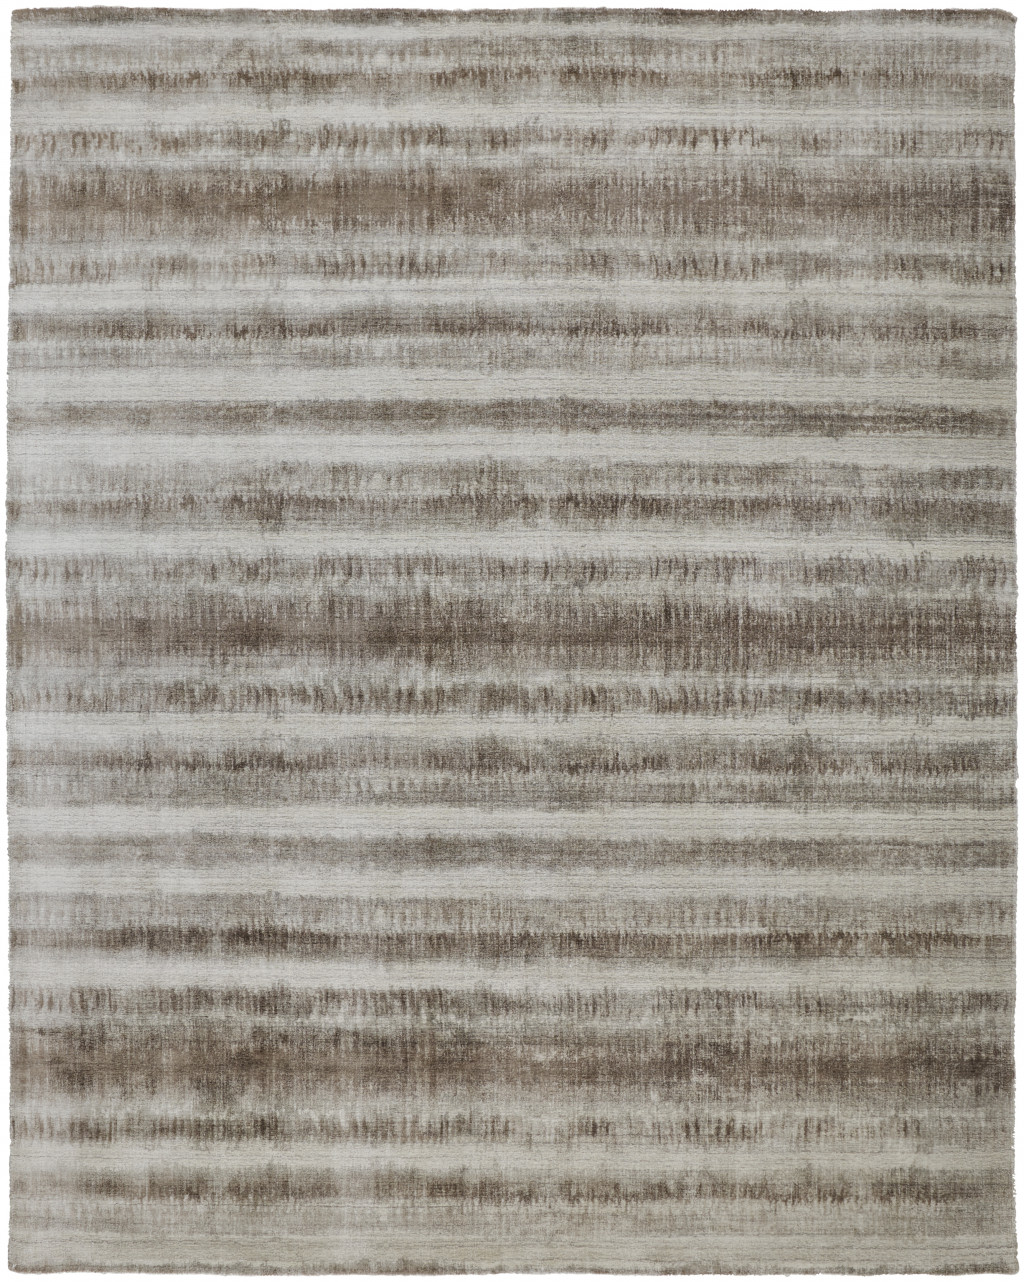 4' X 6' Tan Ivory And Brown Abstract Hand Woven Area Rug-514435-1